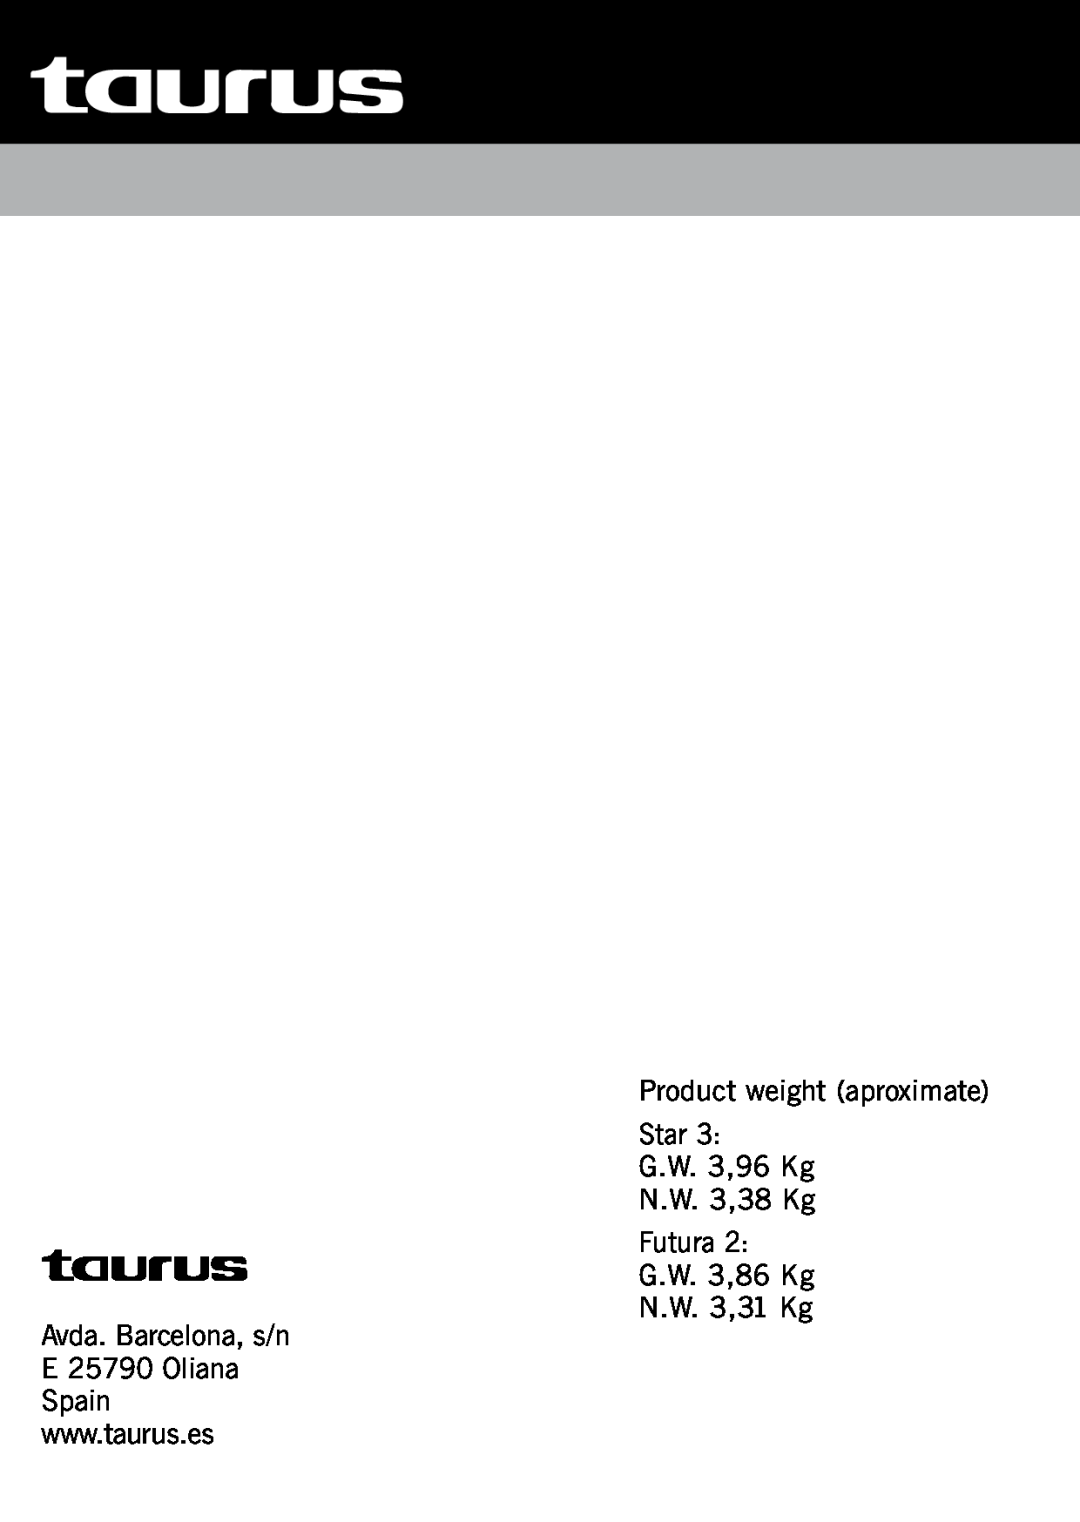 Taurus Group Star 3 manual Product weight aproximate Star G.W. 3,96 Kg N.W. 3,38 Kg Futura, G.W. 3,86 Kg N.W. 3,31 Kg 